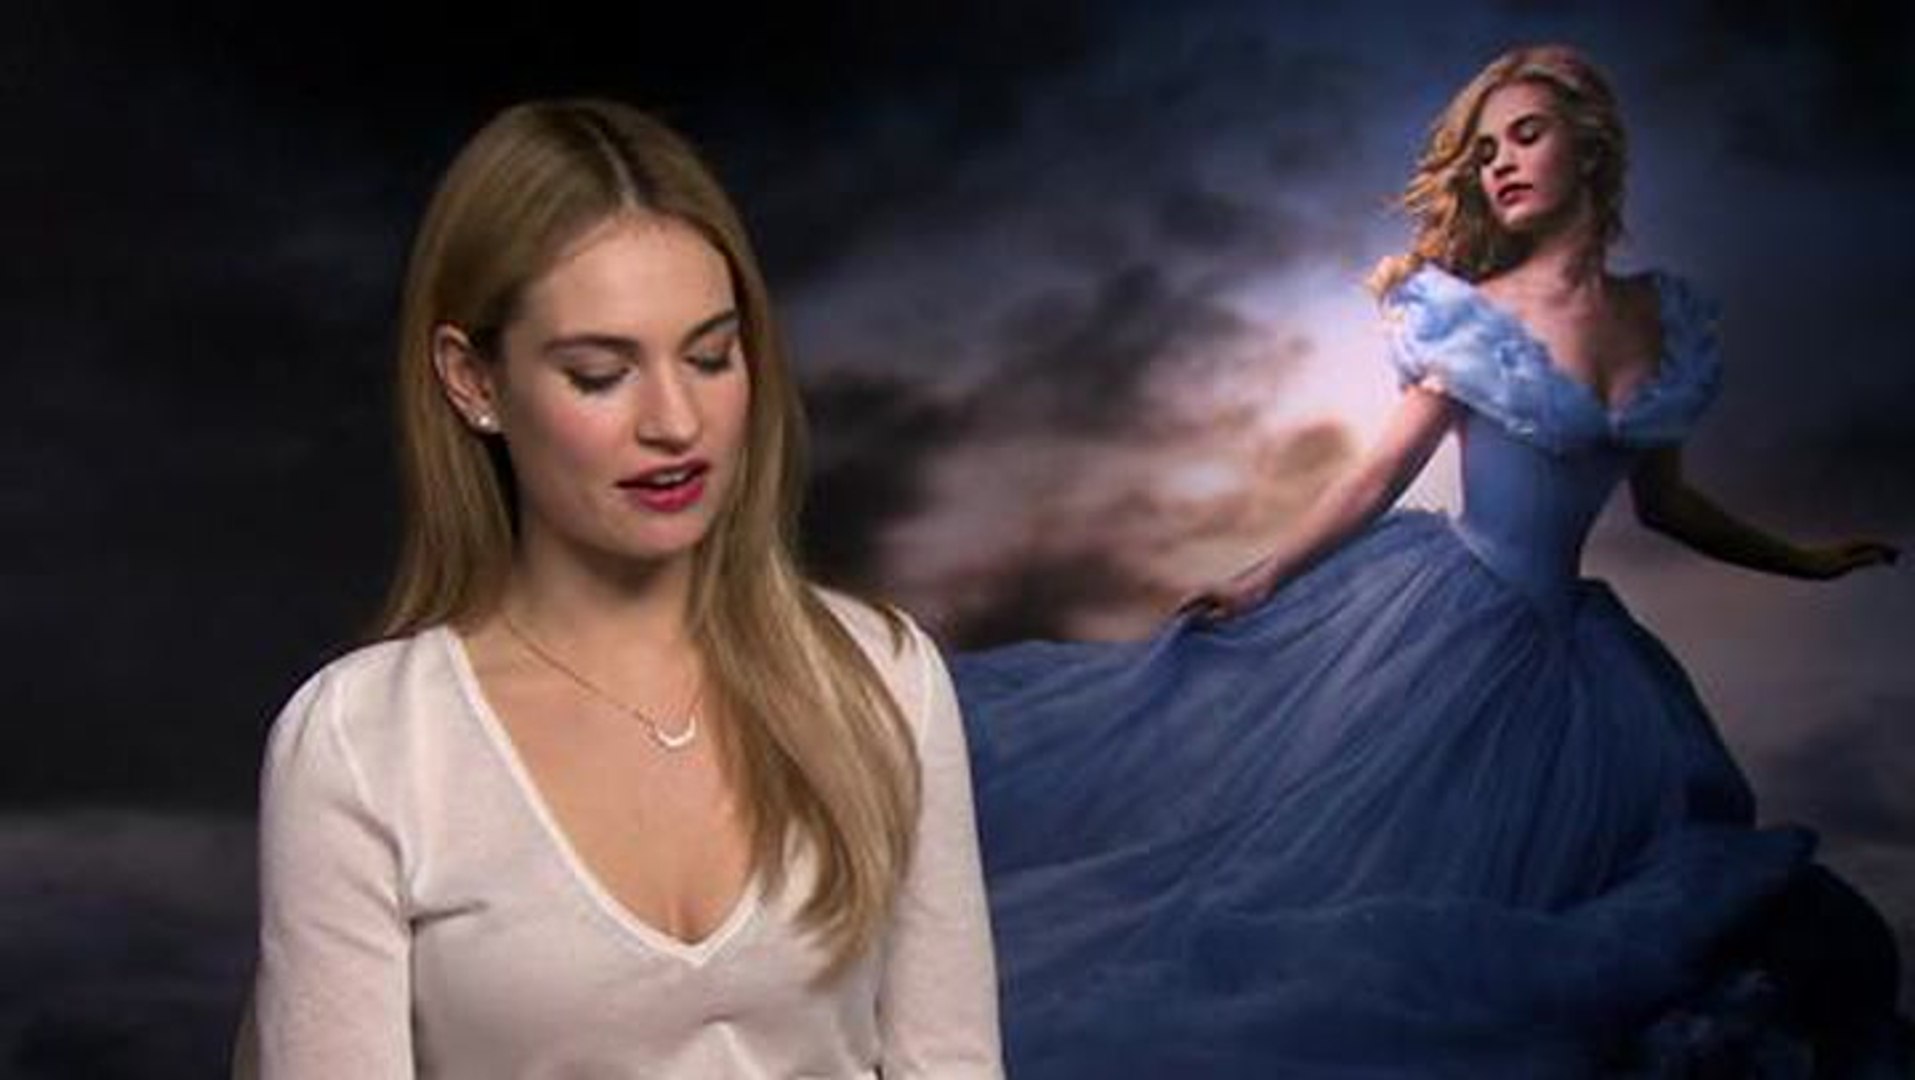 Cinderella Exclusive Interview With Lily James & Richard Madden